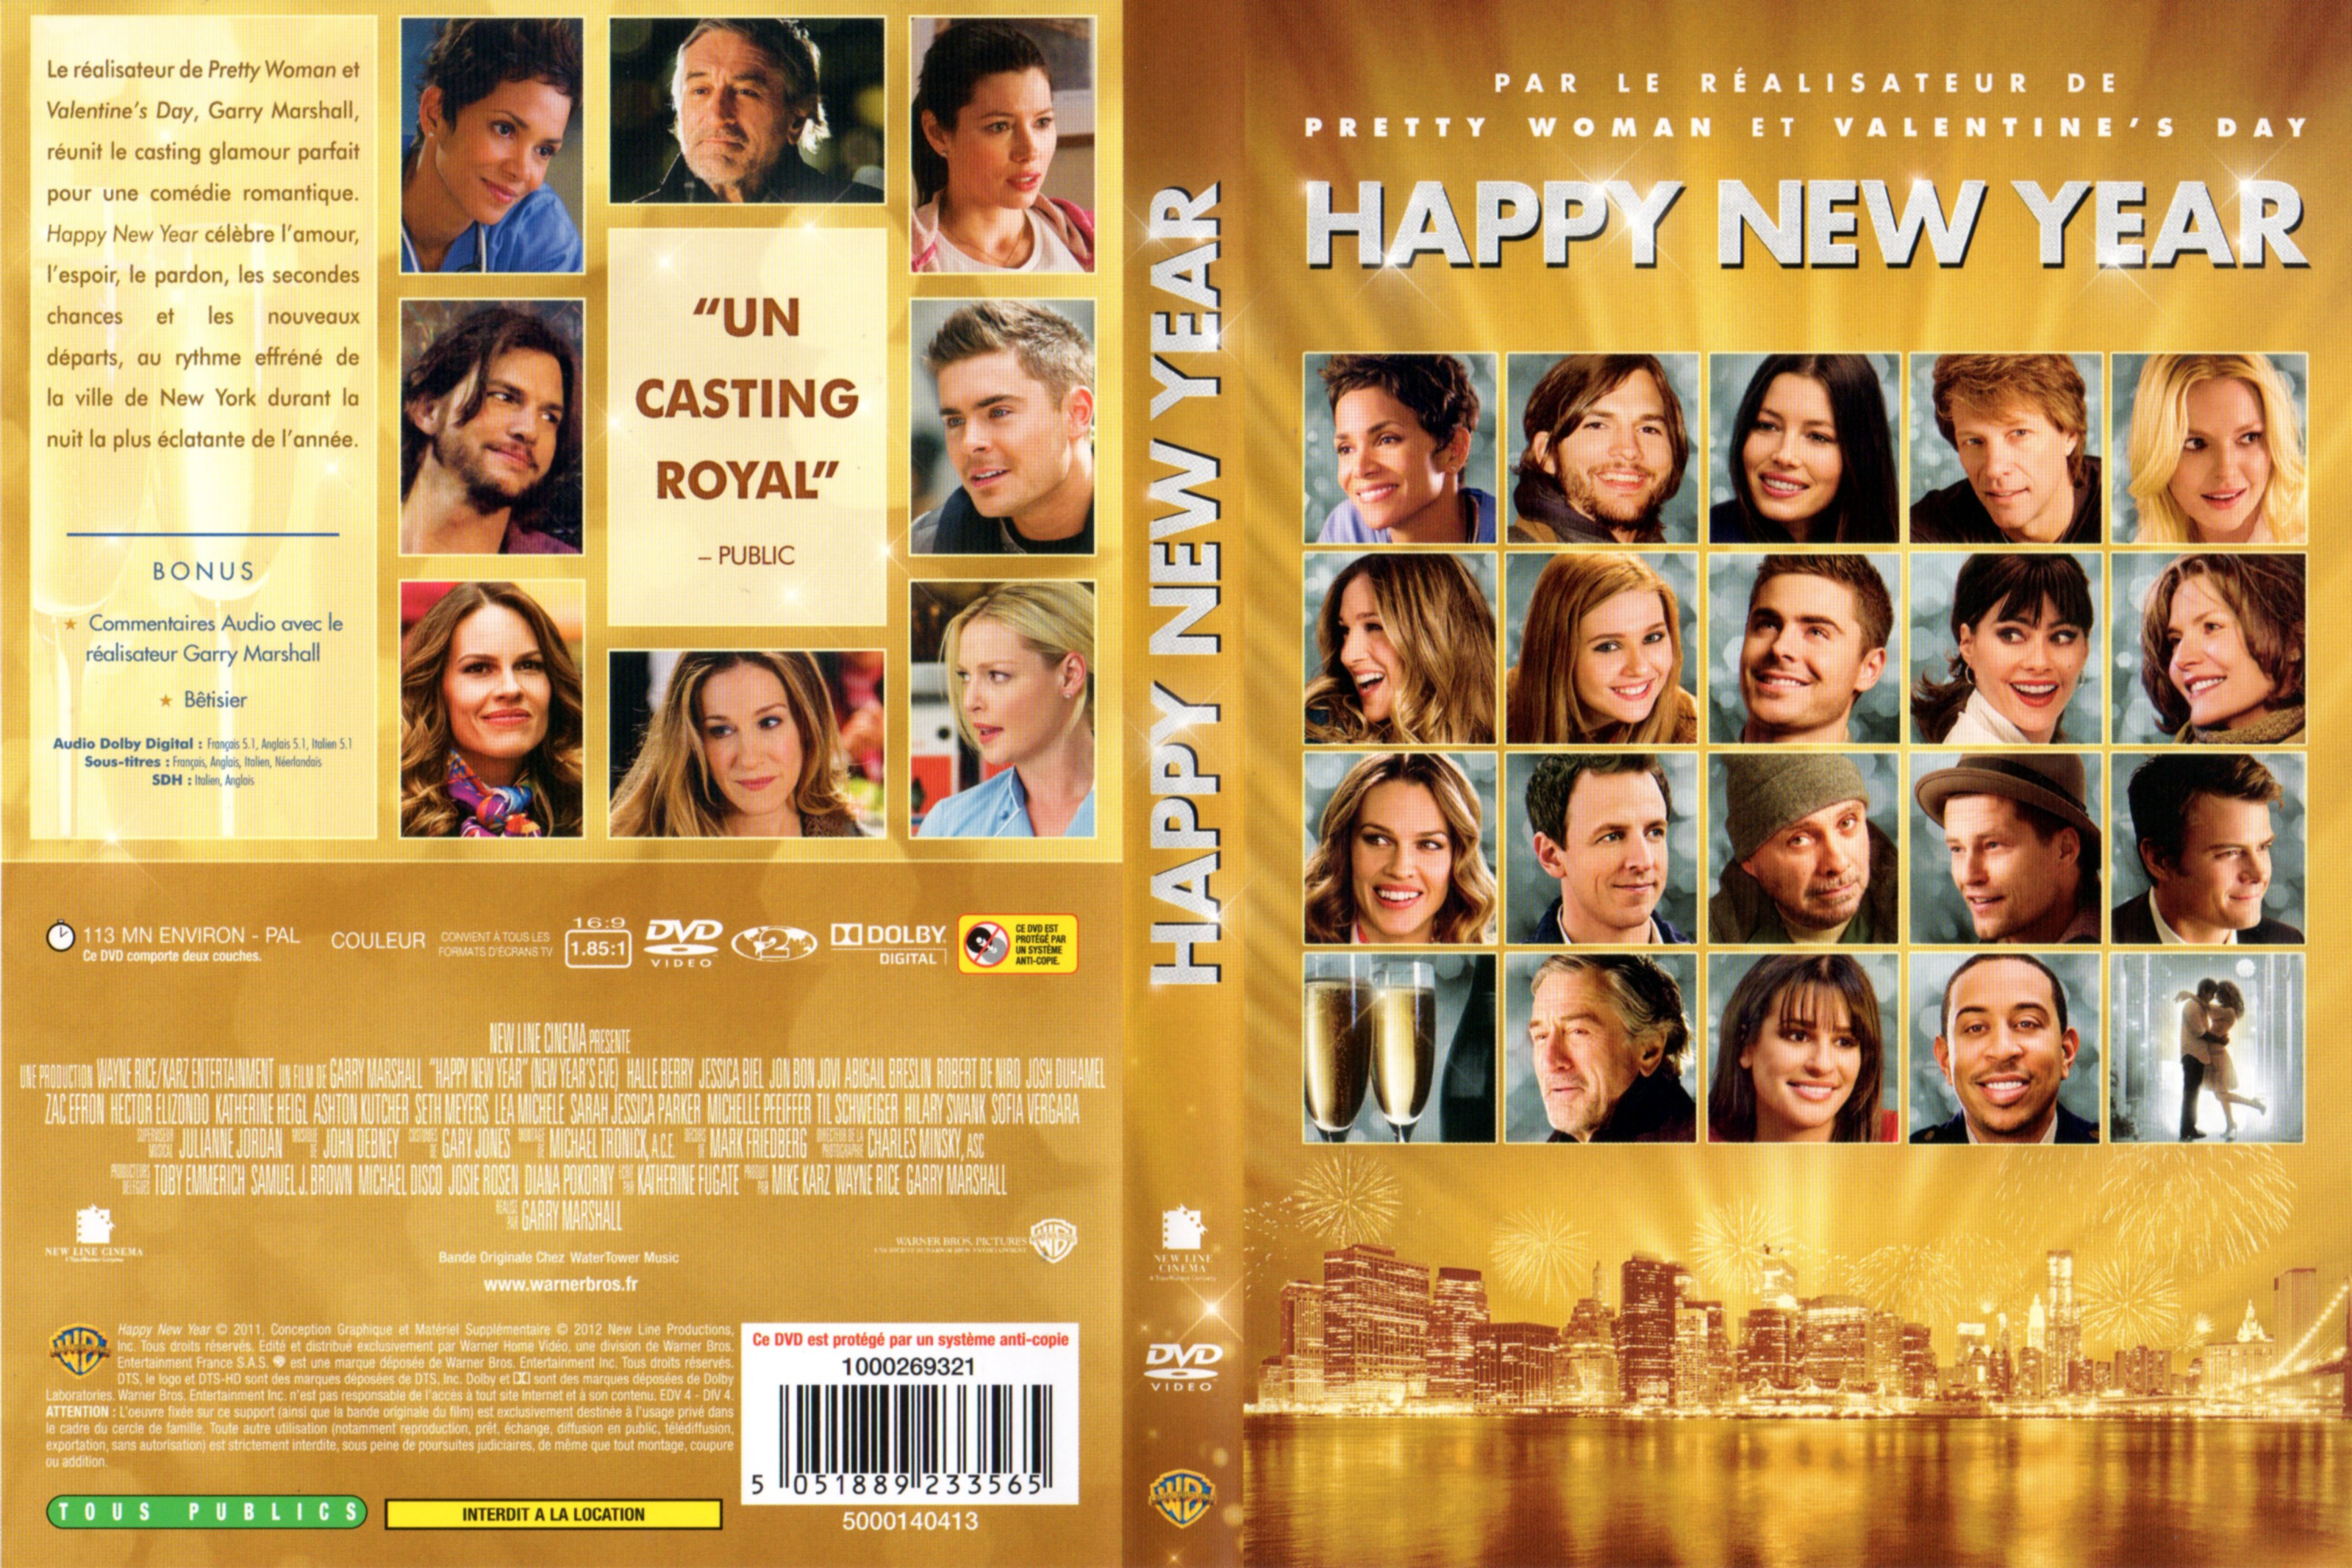 Jaquette DVD Happy new year